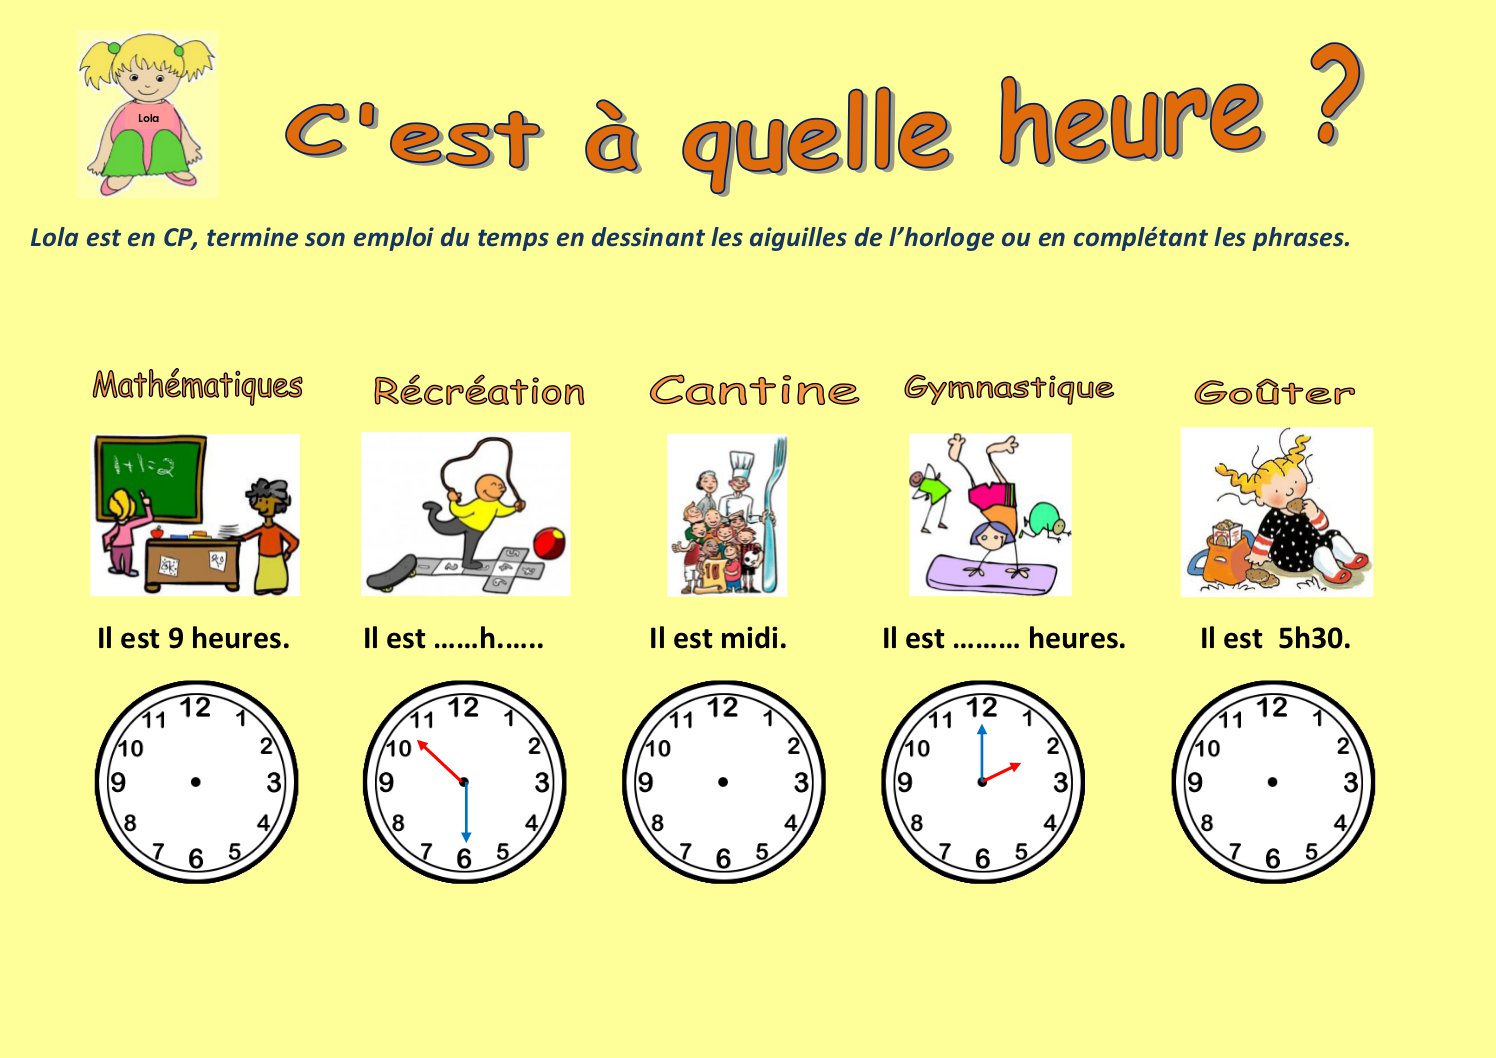 Common Expressions with "A Quelle Heure"